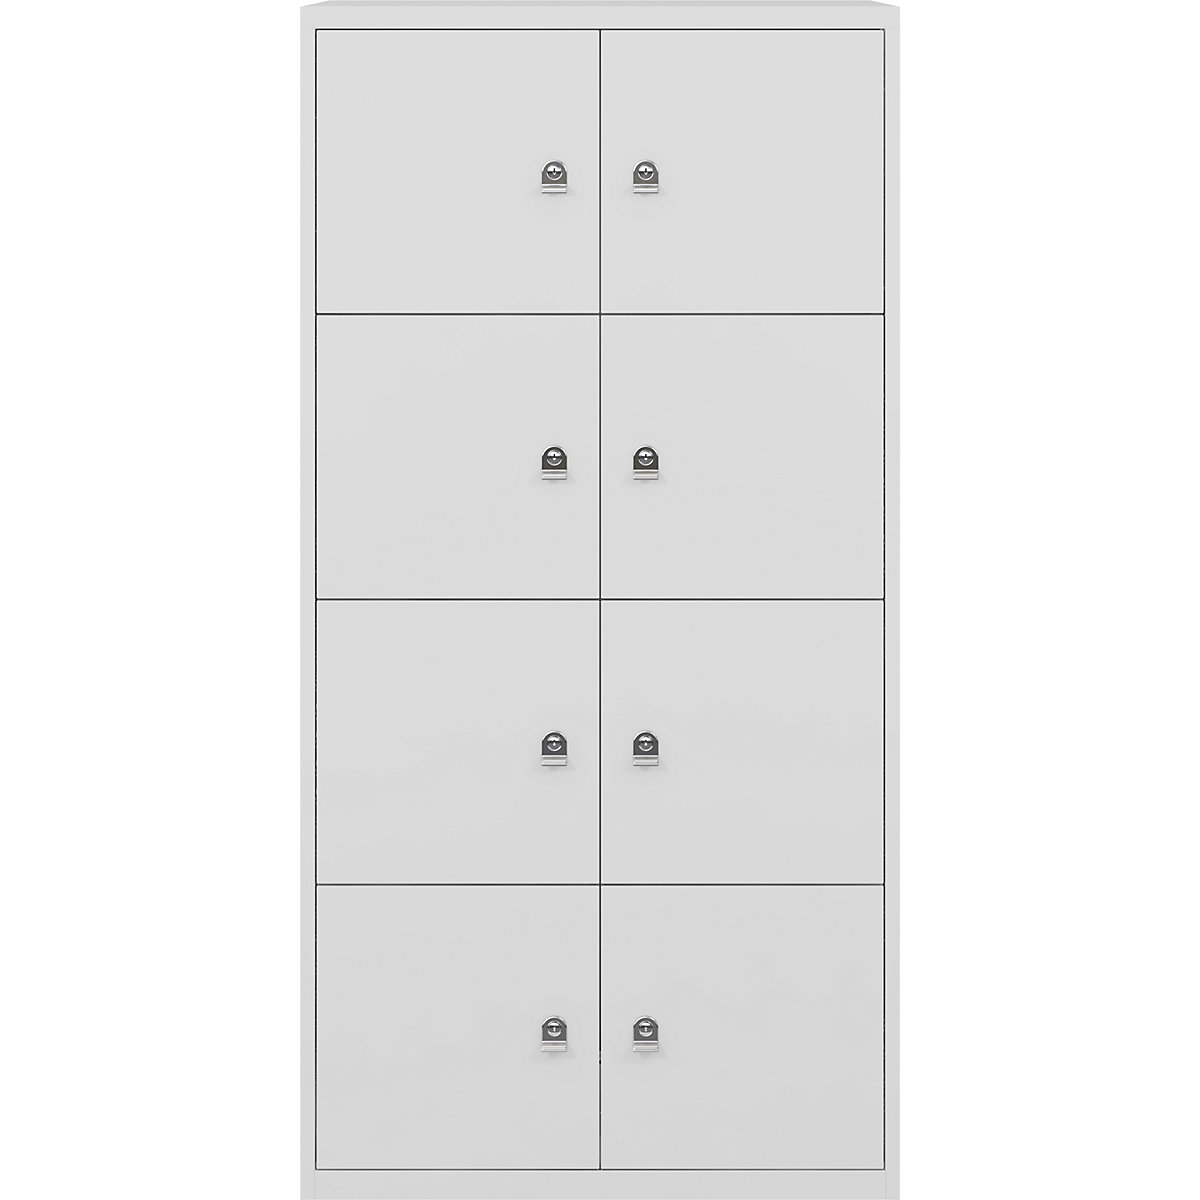 BISLEY – LateralFile™ lodge, with 8 lockable compartments, height 375 mm each, light grey